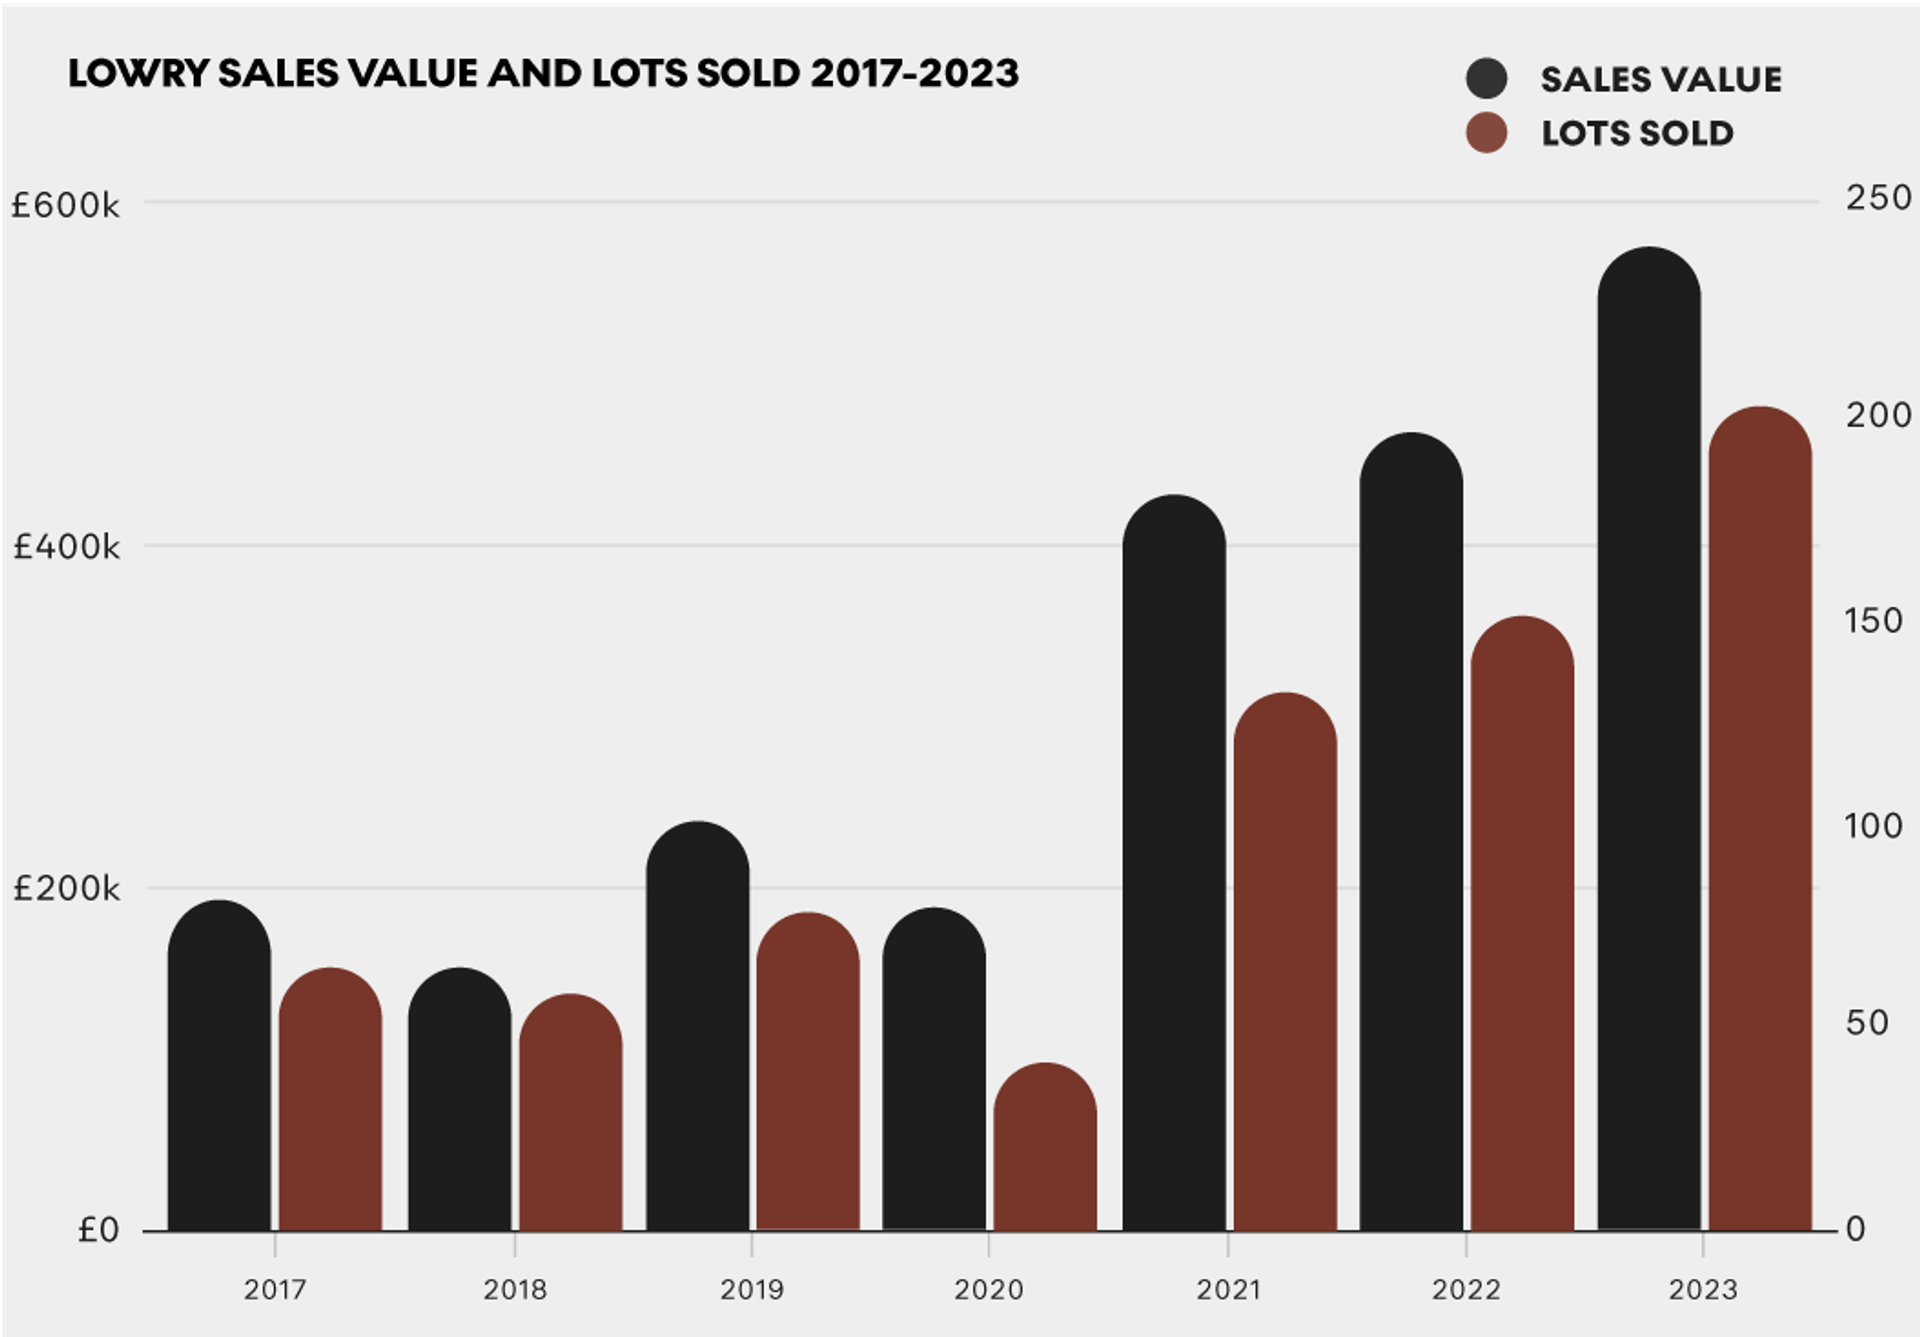 Double bar graph illustrating the sales value and lots sold of Lowry's print market over a seven year period. 